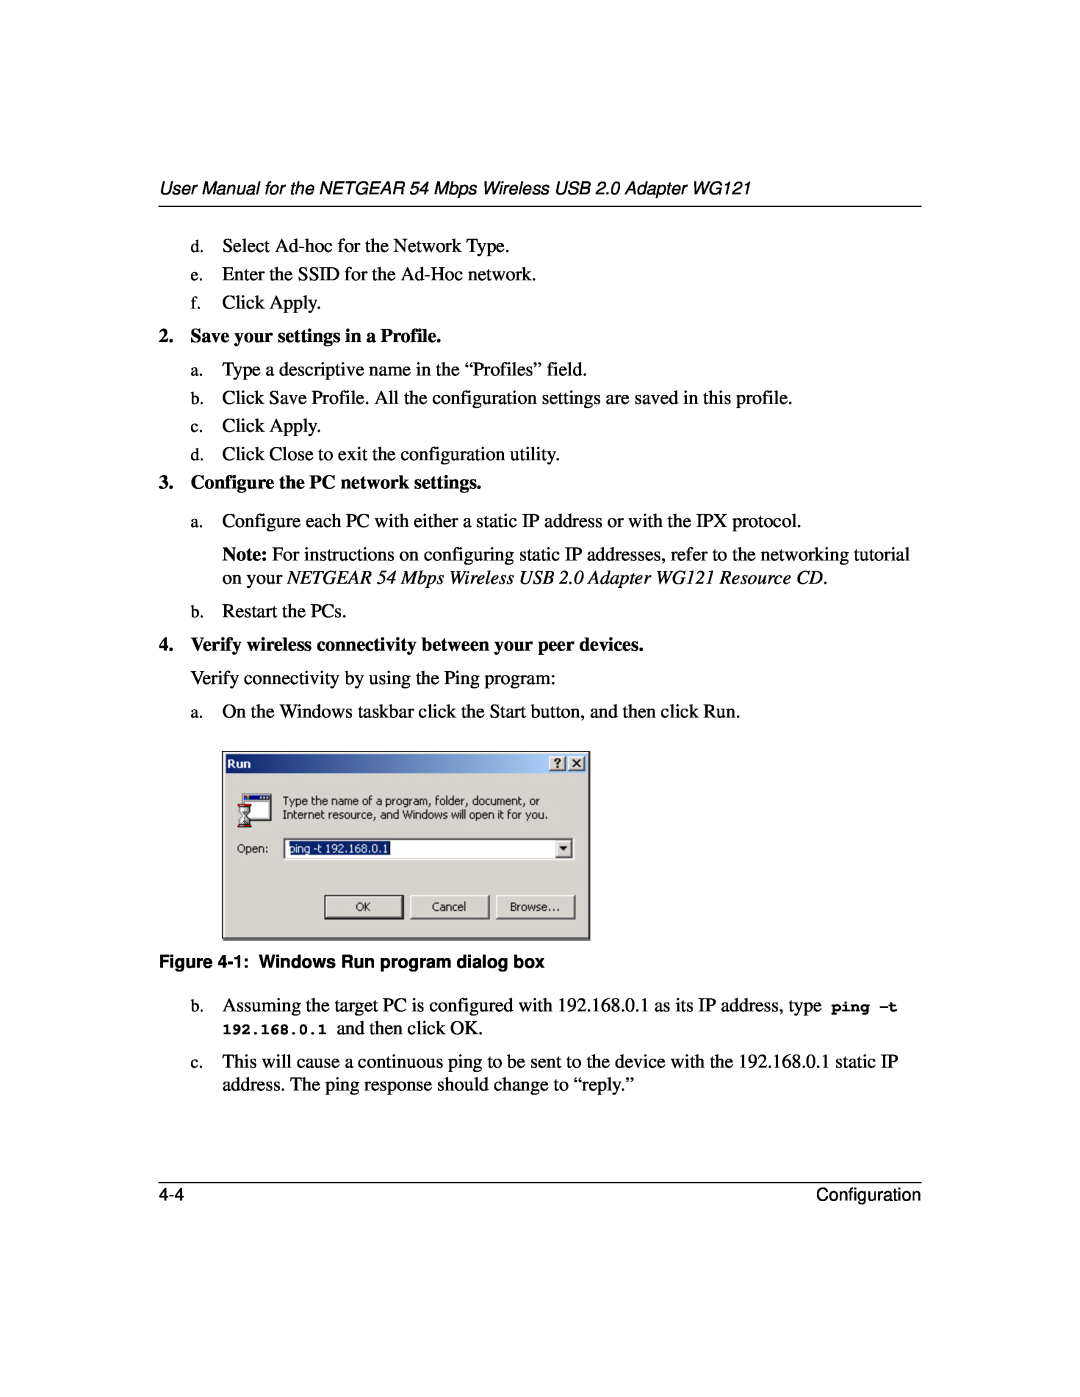 NETGEAR WG121 user manual Save your settings in a Profile, Configure the PC network settings 